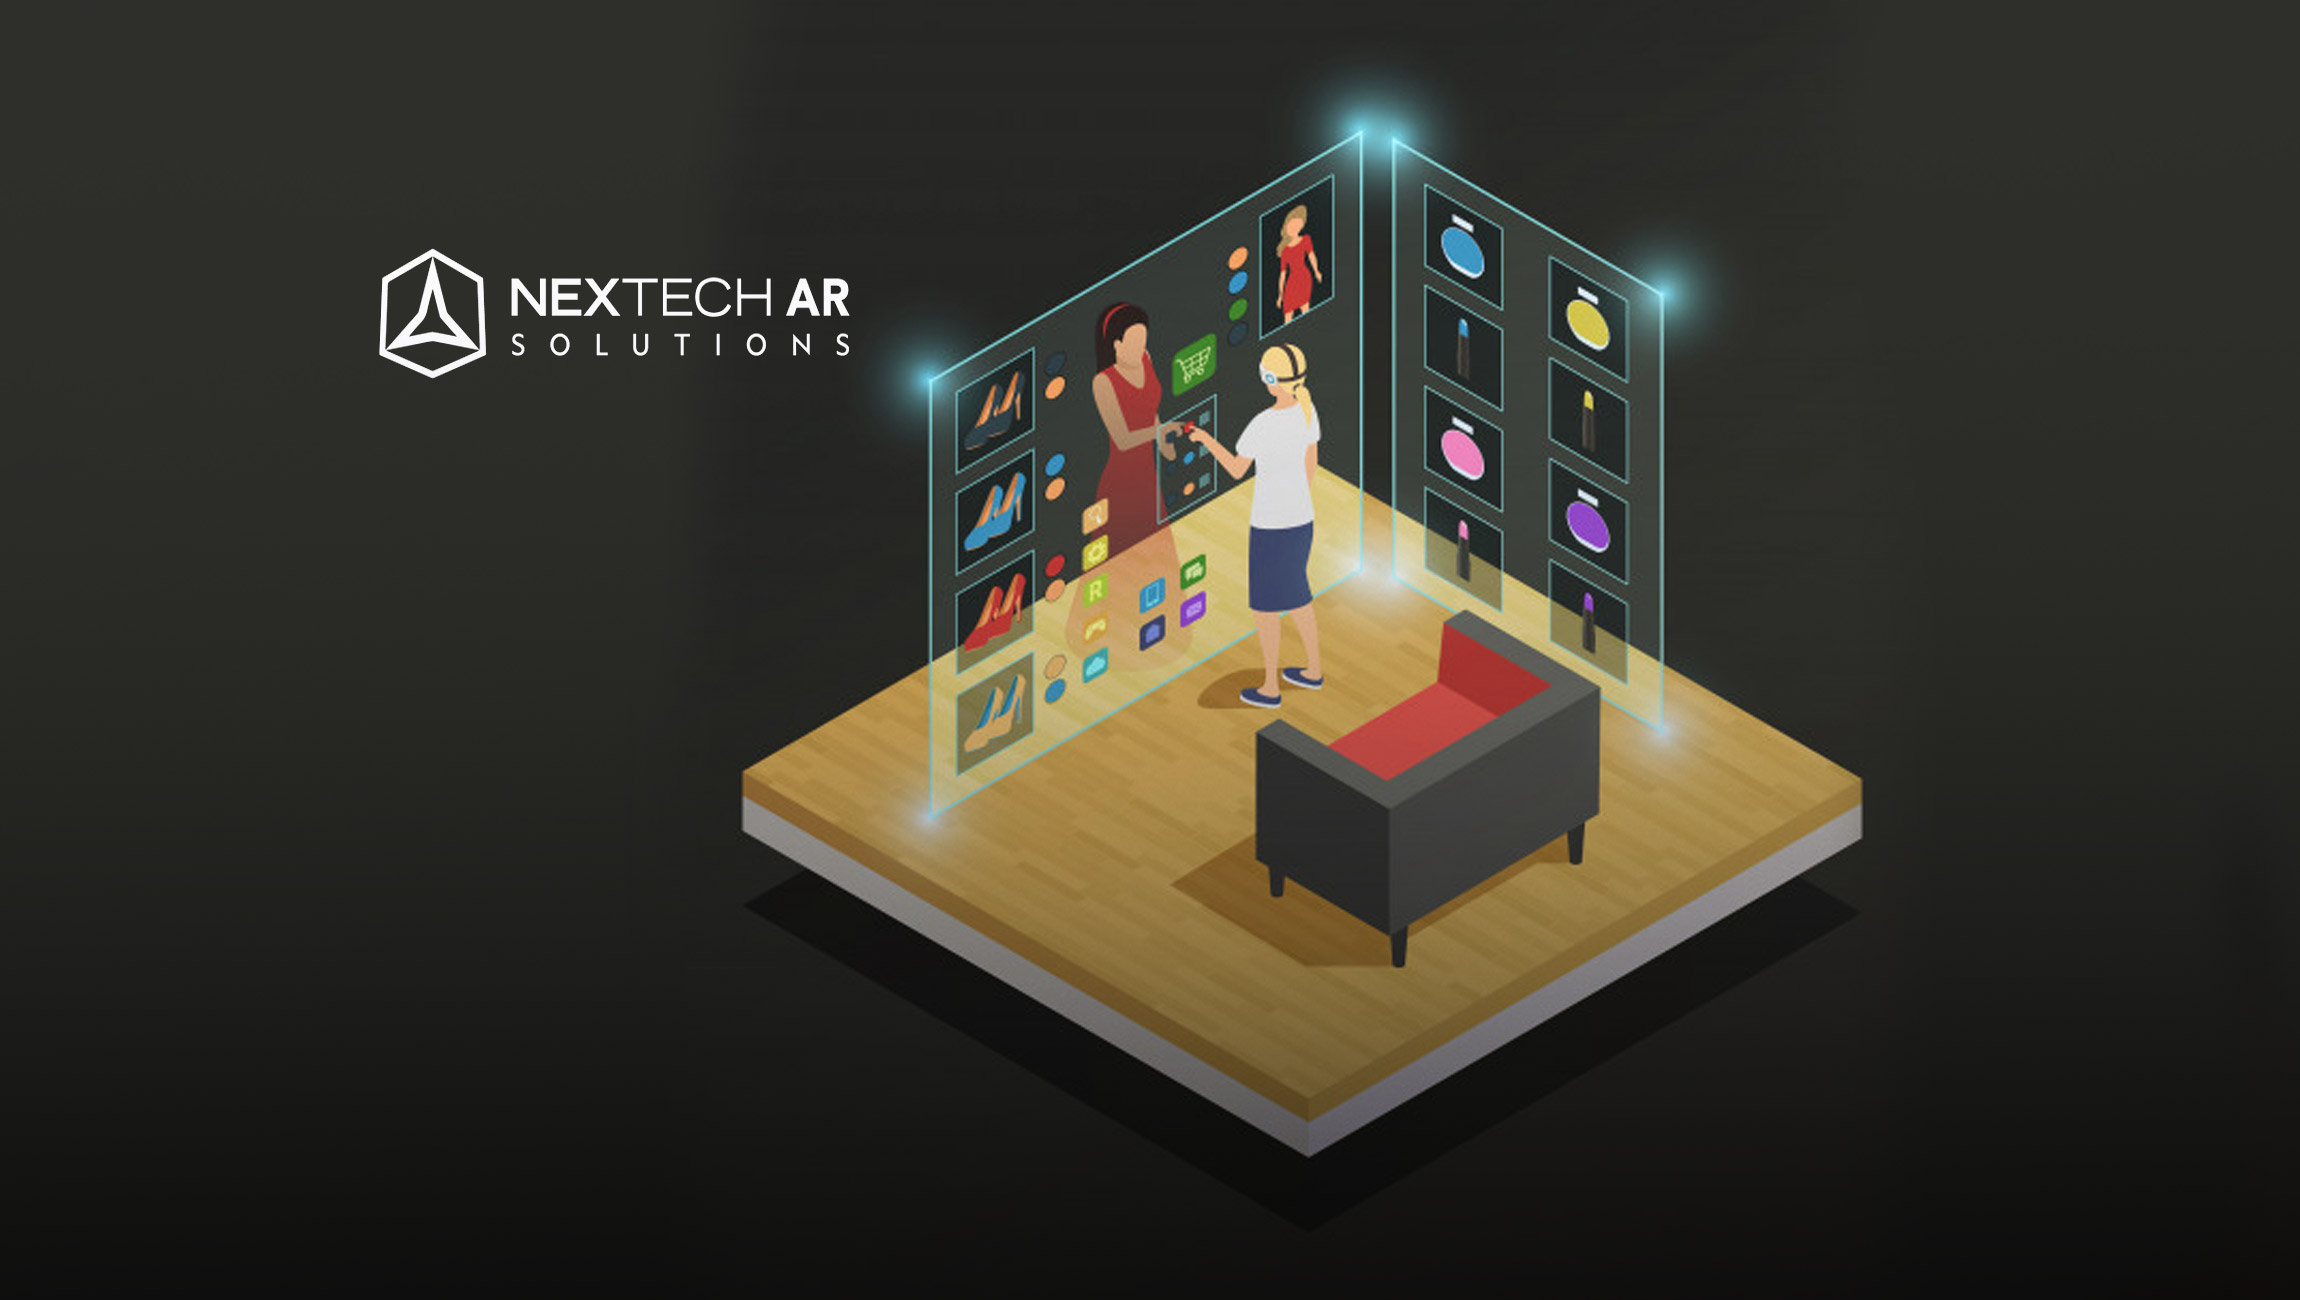 NexTech AR Announces Launch of New Video Streaming Solution with AI and AR Capabilities